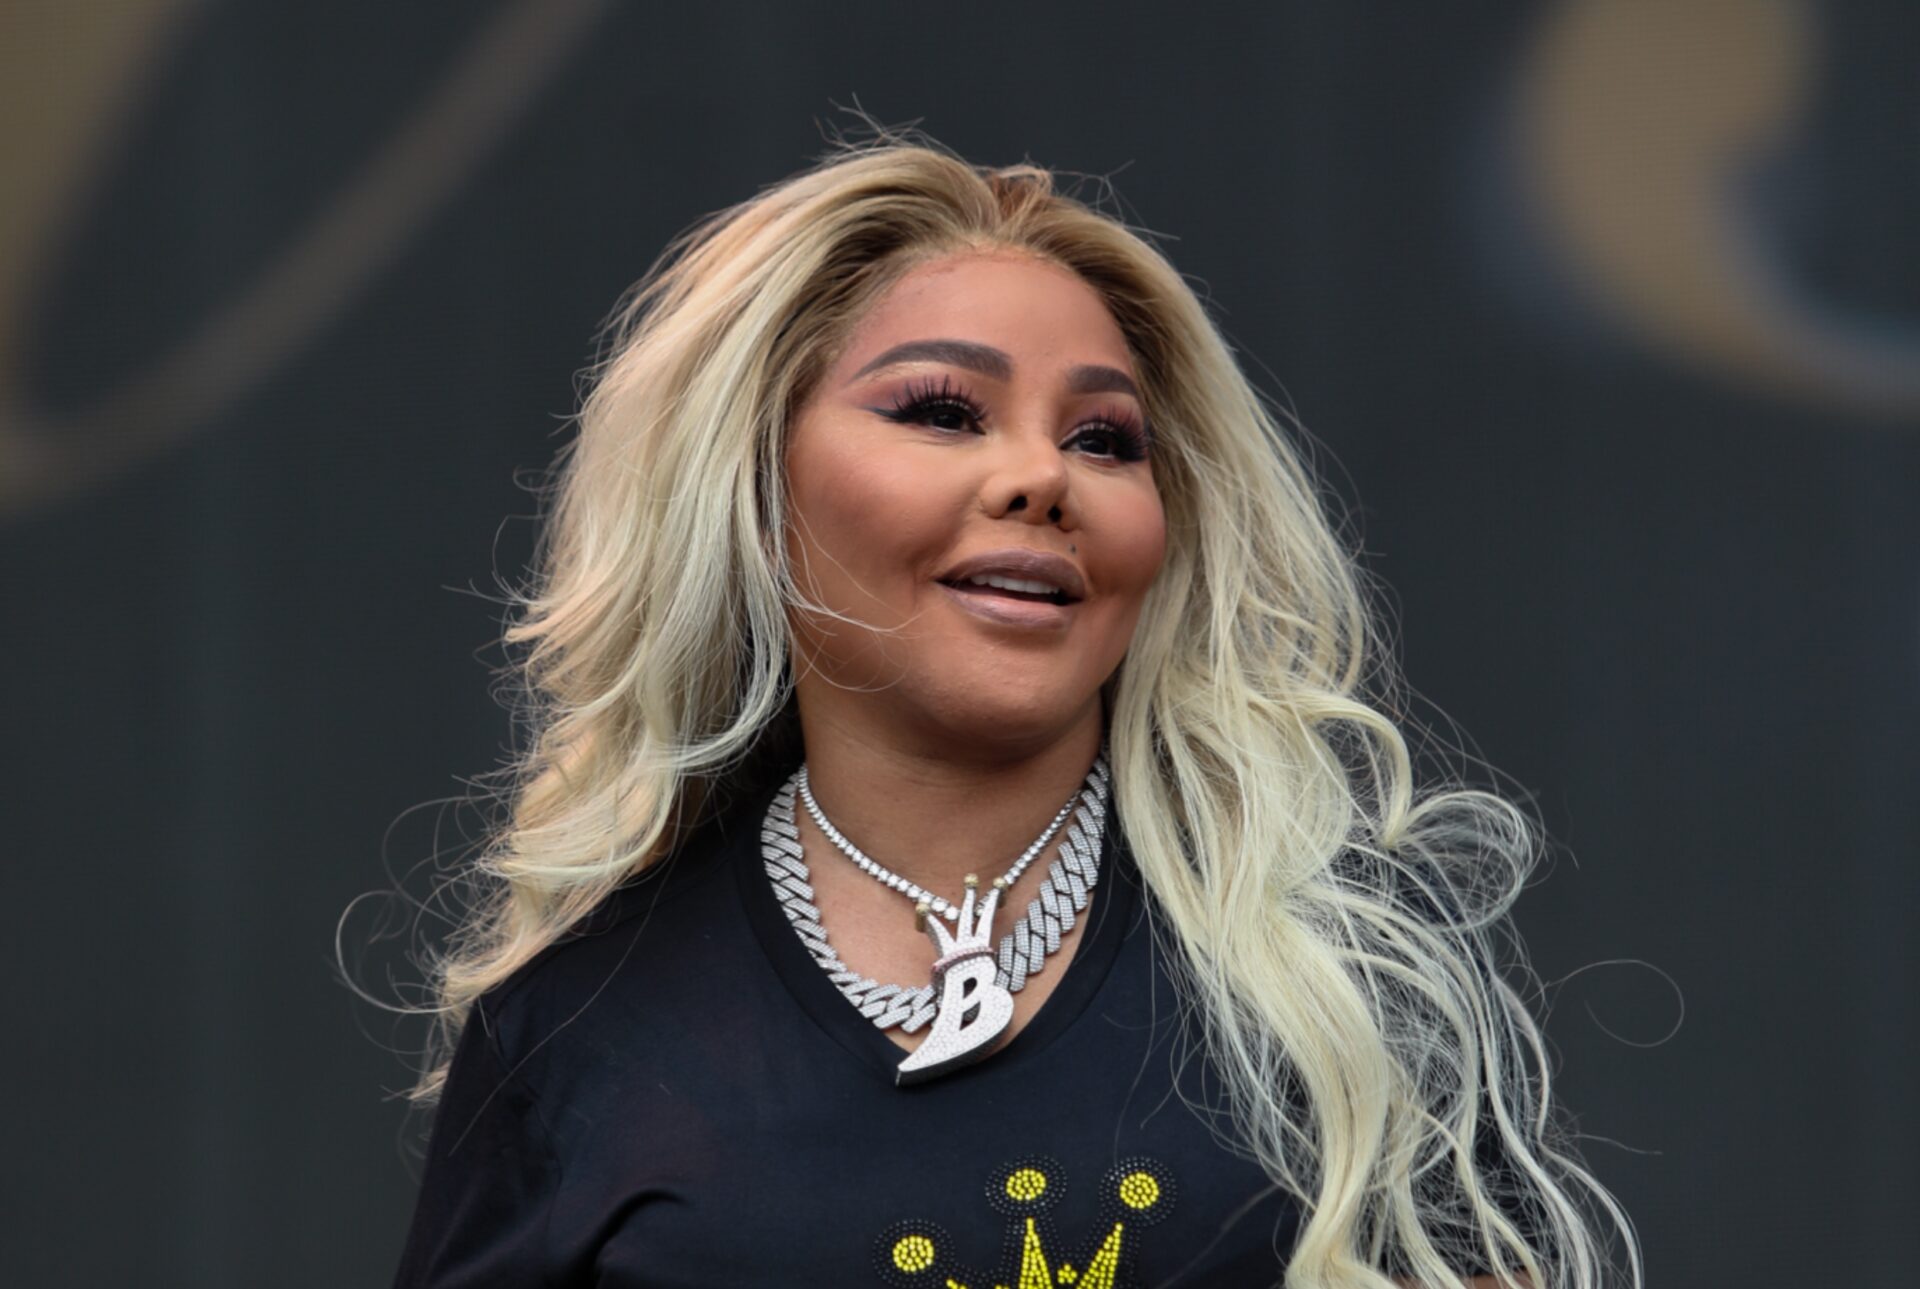 Lil Kim Believes Her Memoir Will Outsell The Bible, Foxy Brown Says Otherwise